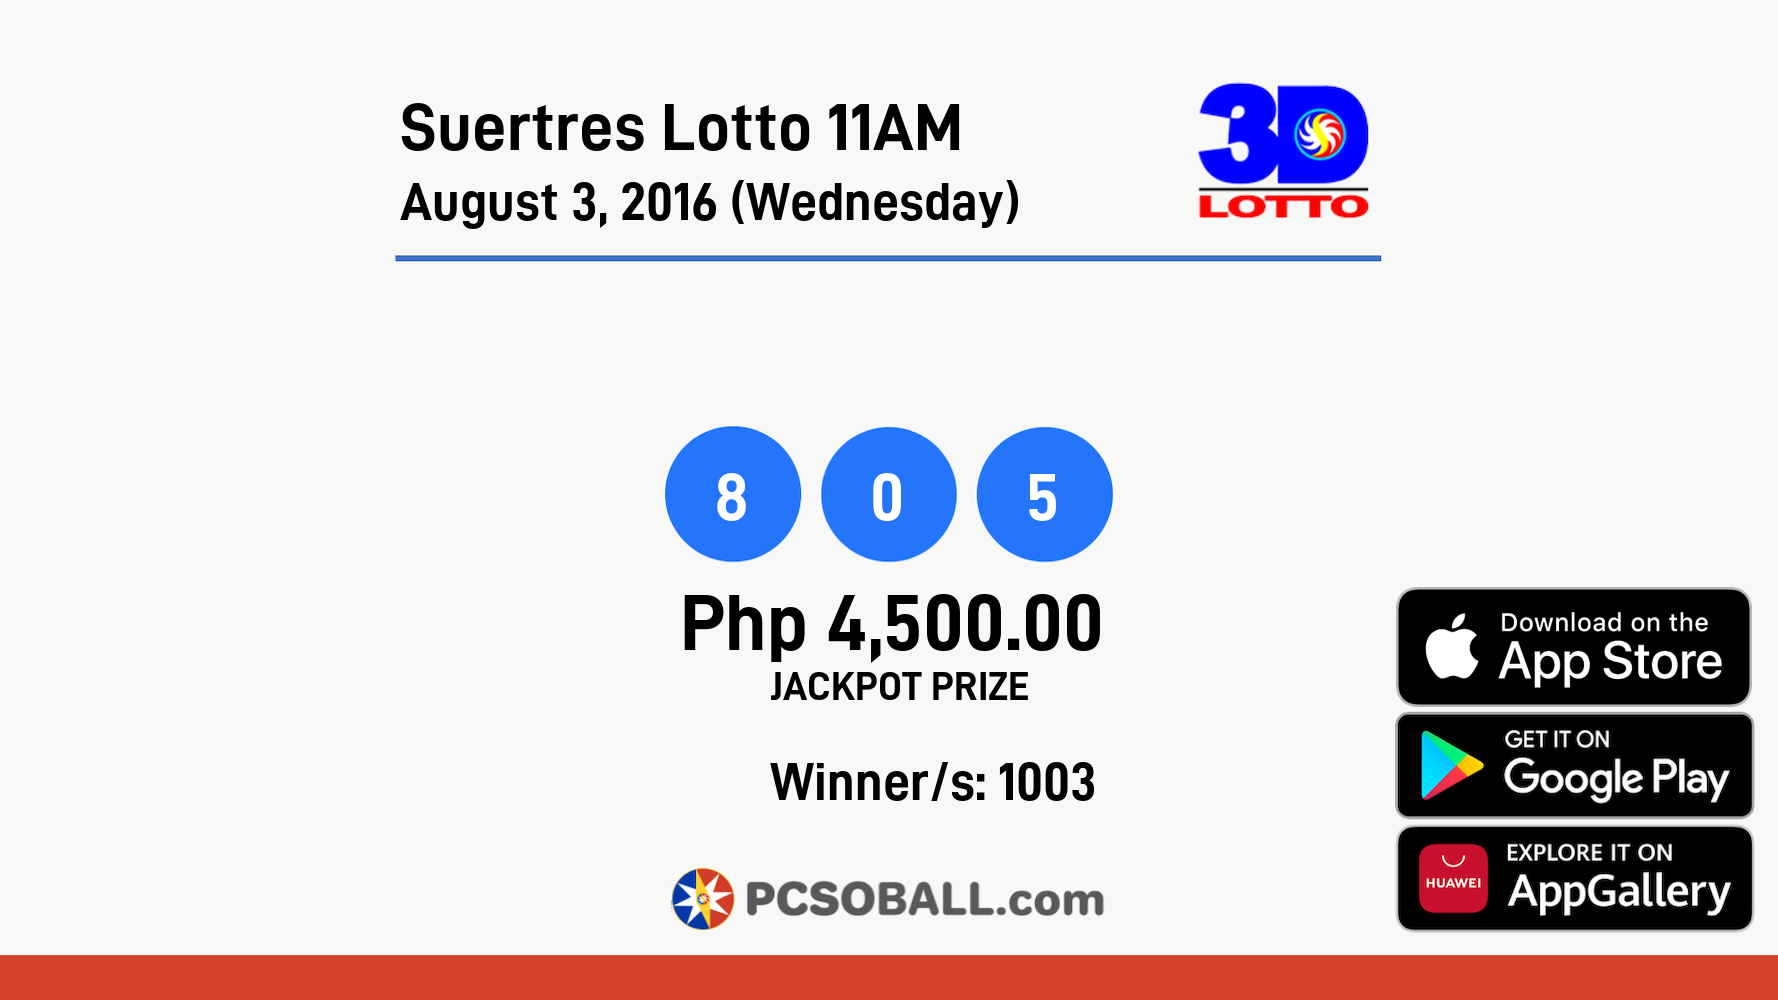 Suertres Lotto 11AM August 3, 2016 (Wednesday) Result